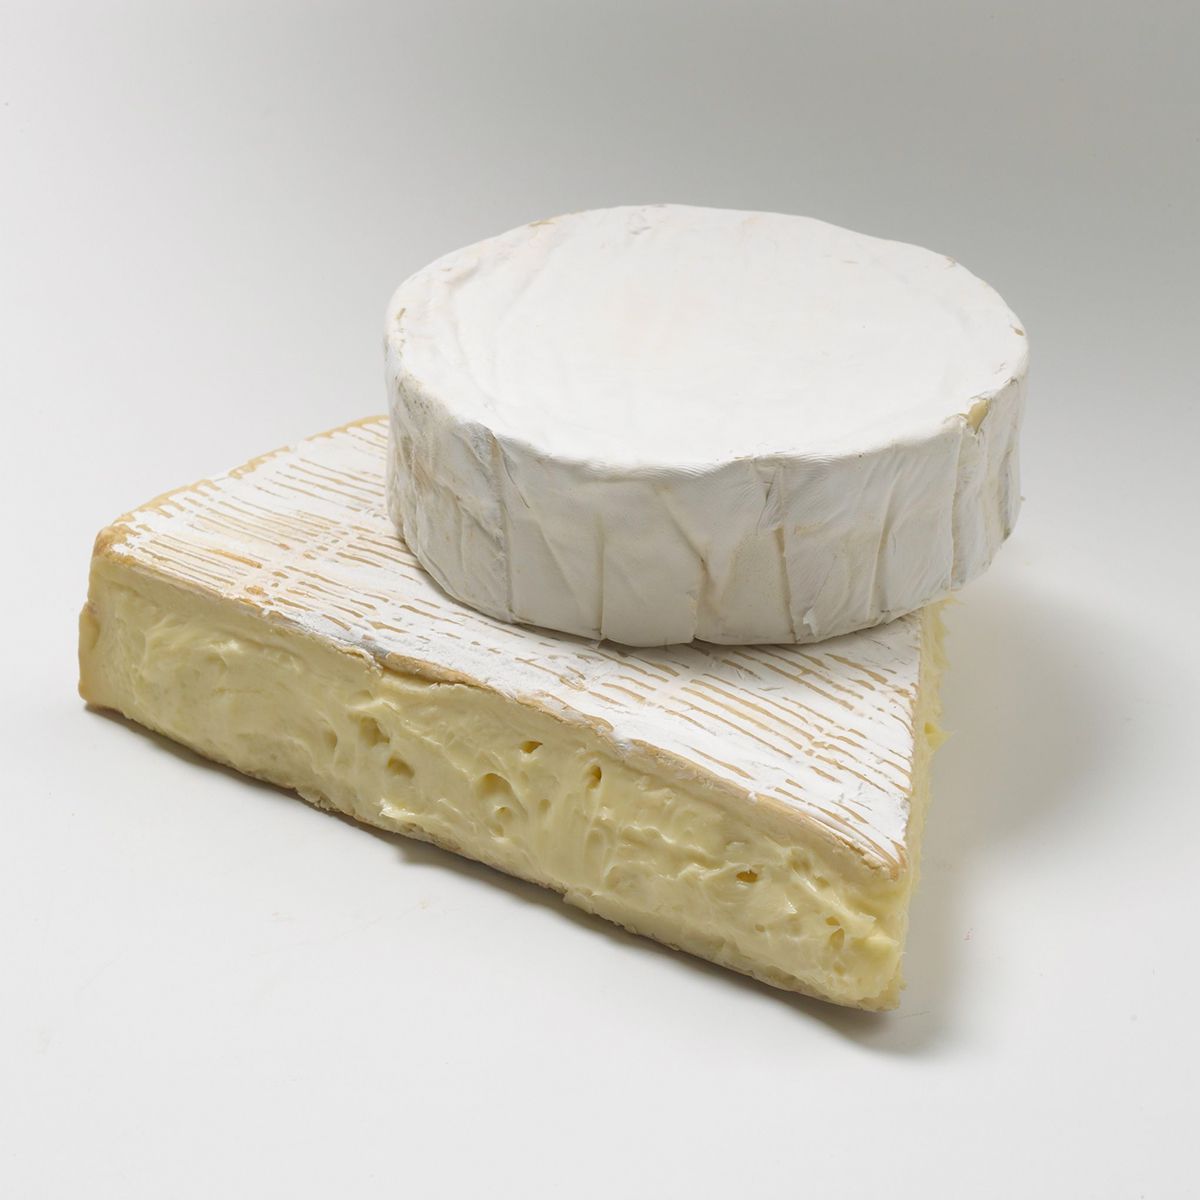 Brie and Camembert cheese stacked on each other